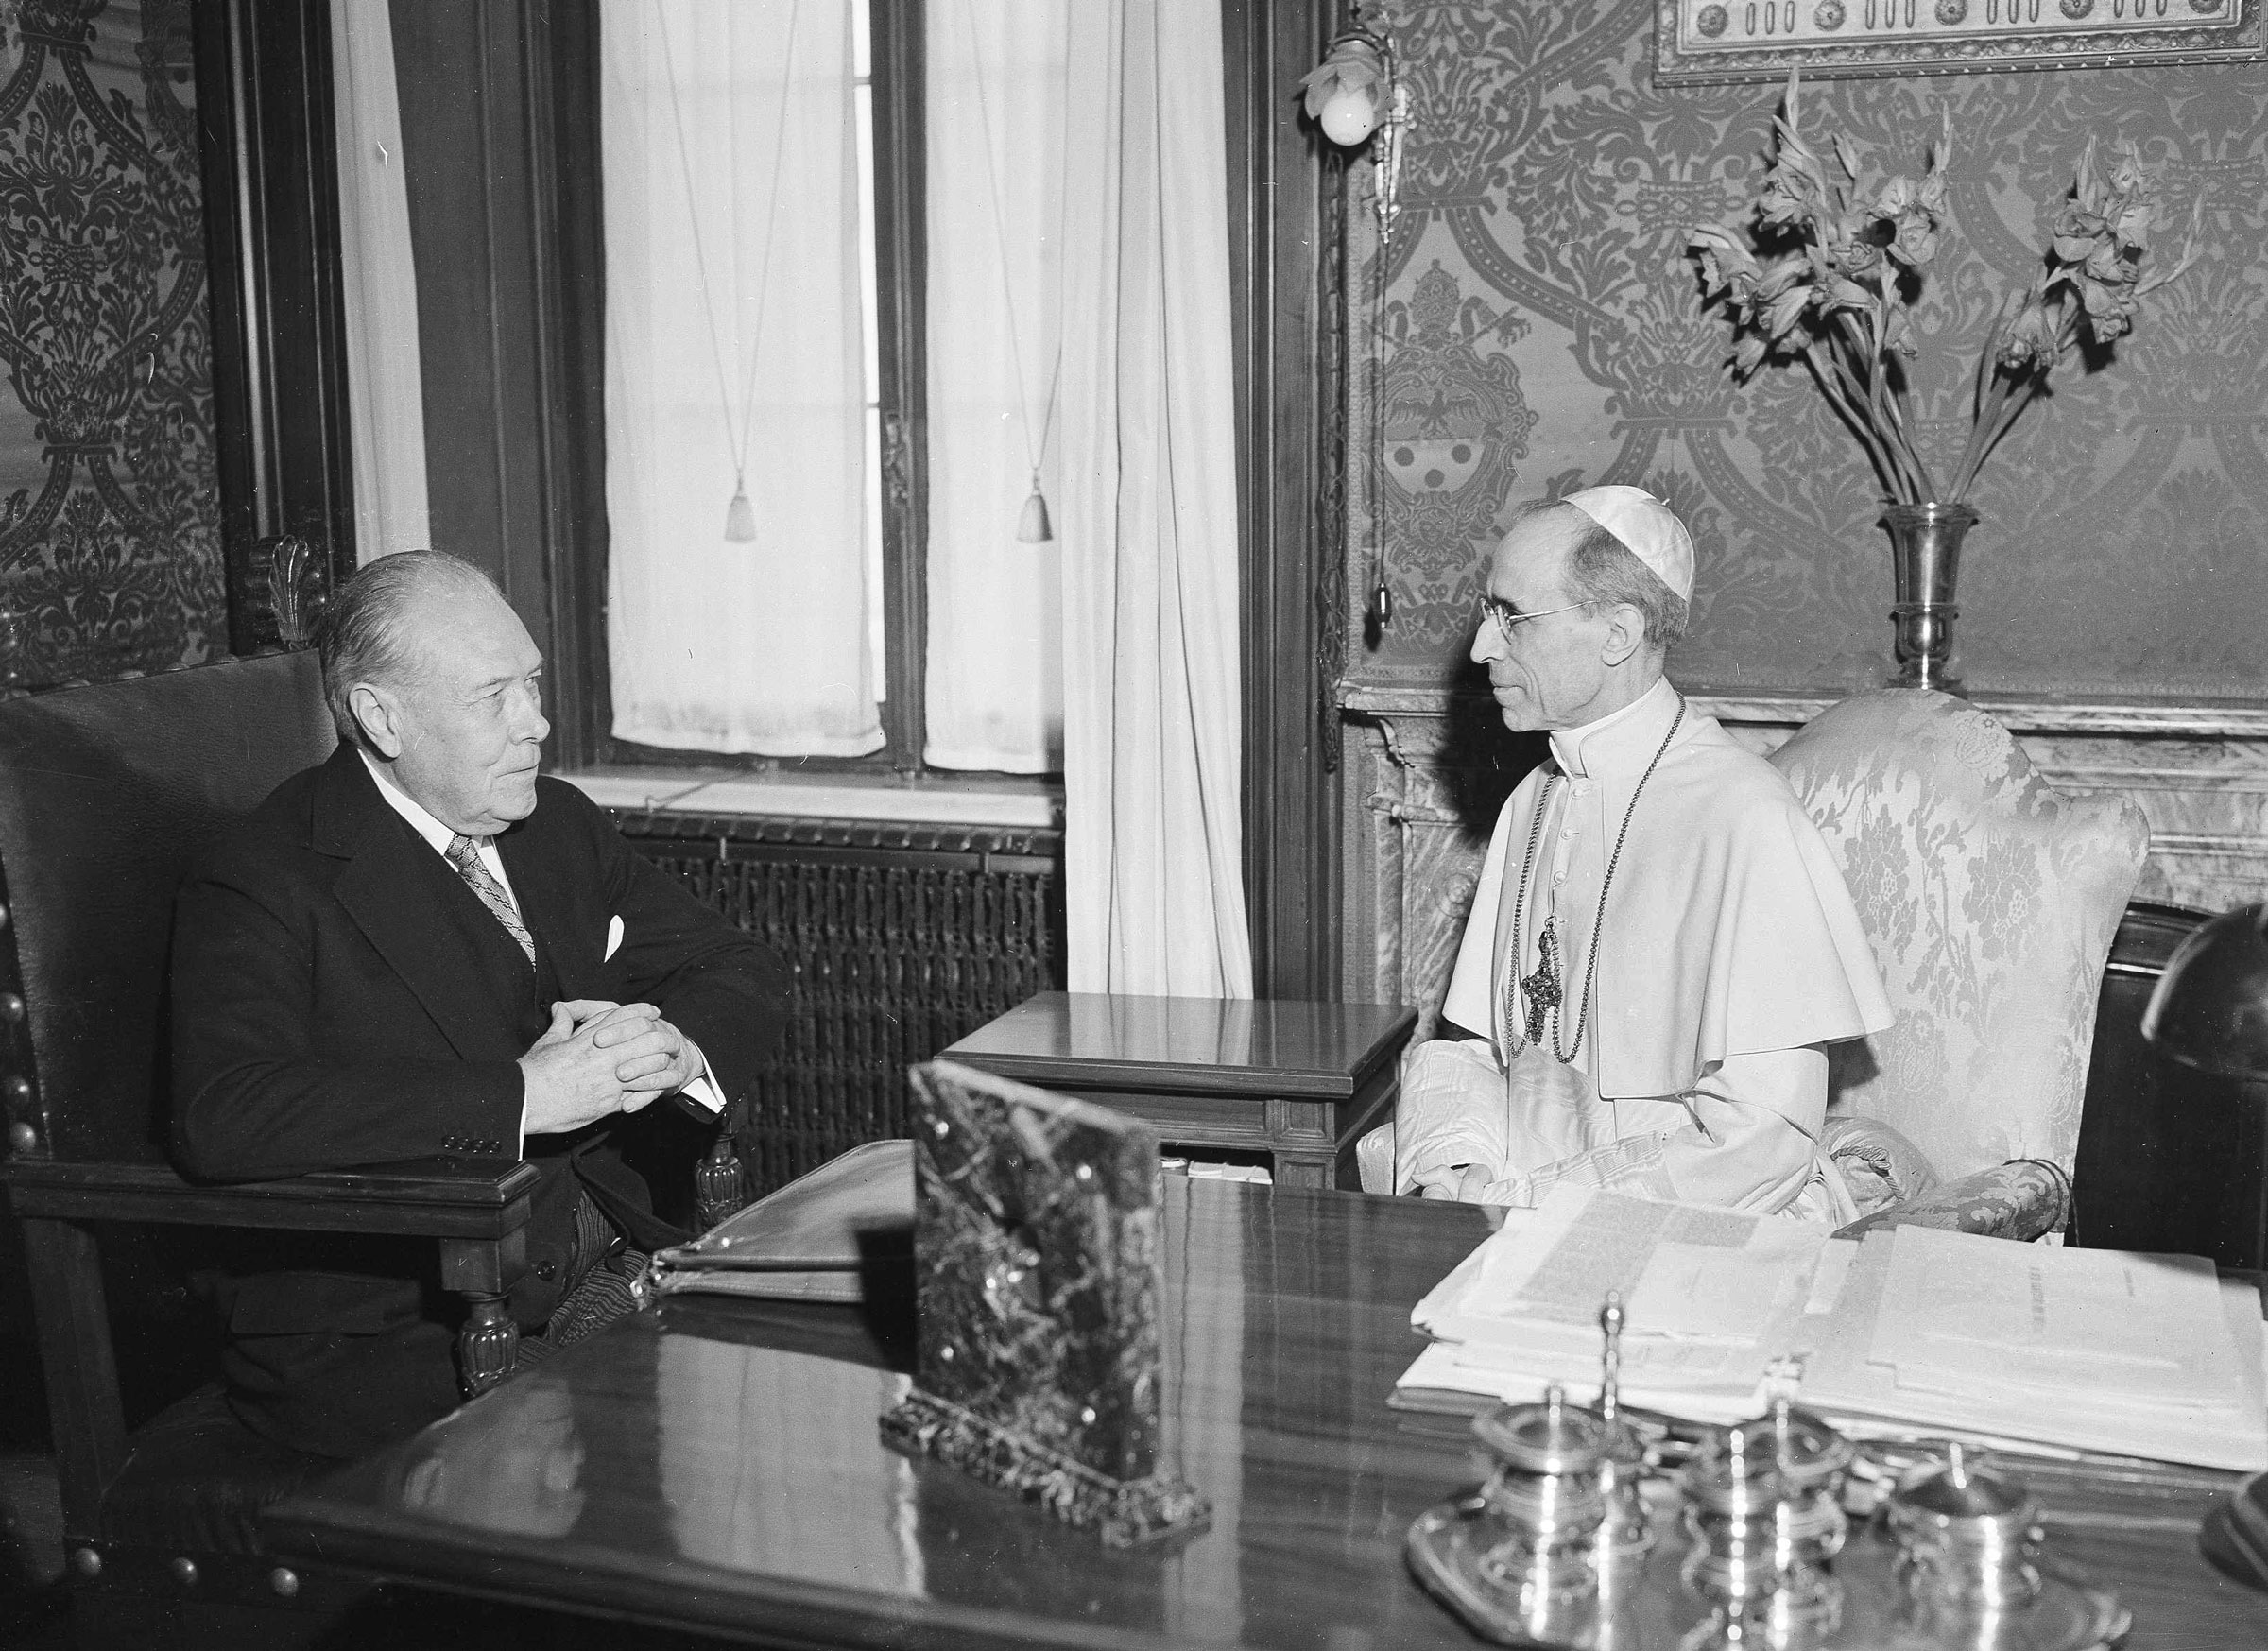 President Truman’s envoy to the Vatican, Myron C. Taylor, left, has an audience with Pope Pius XII